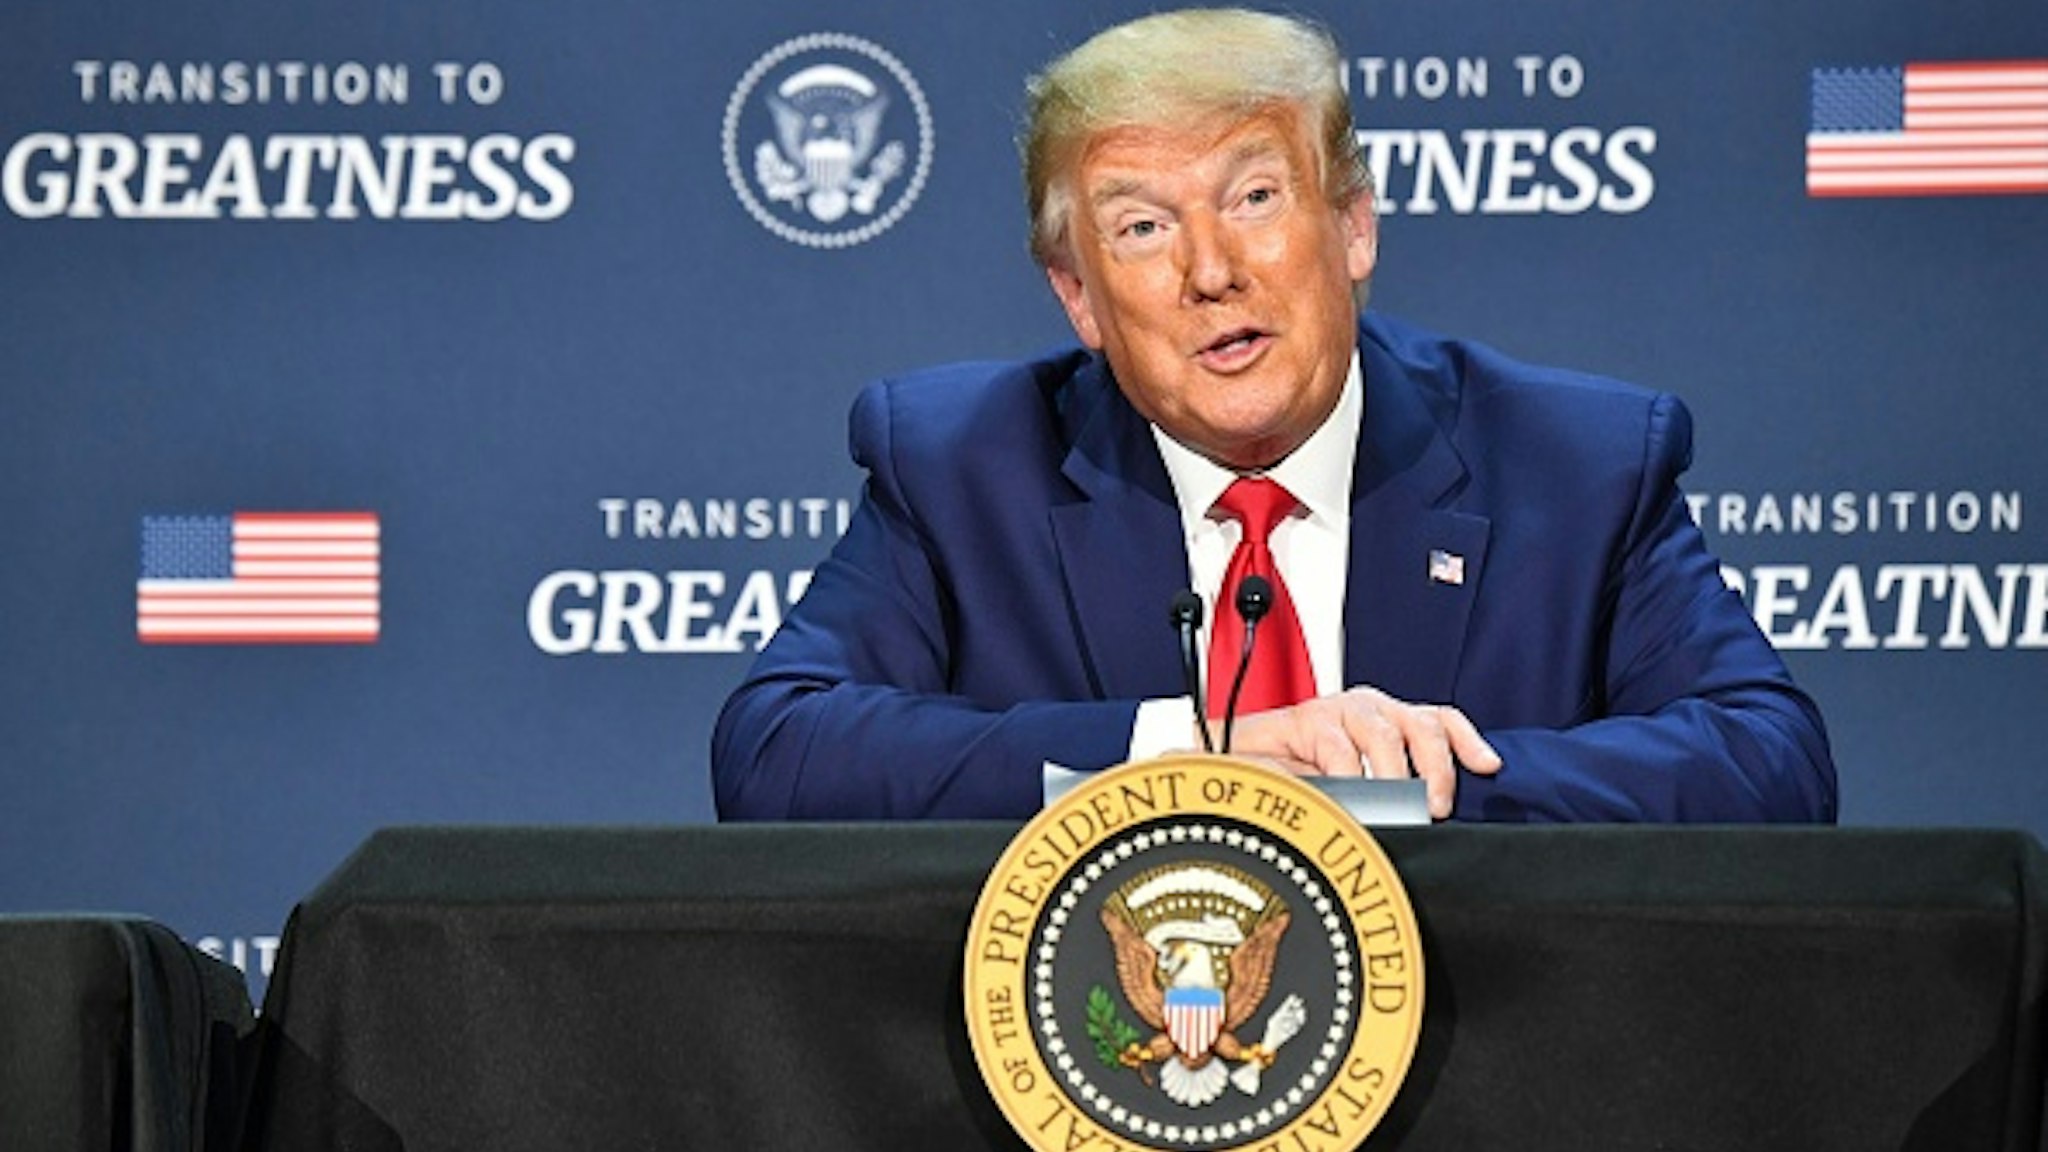 US President Donald Trump hosts a roundtable with faith leaders, law enforcement officials, and small business owners at Gateway Church Dallas Campus in Dallas, Texas, on June 11, 2020.